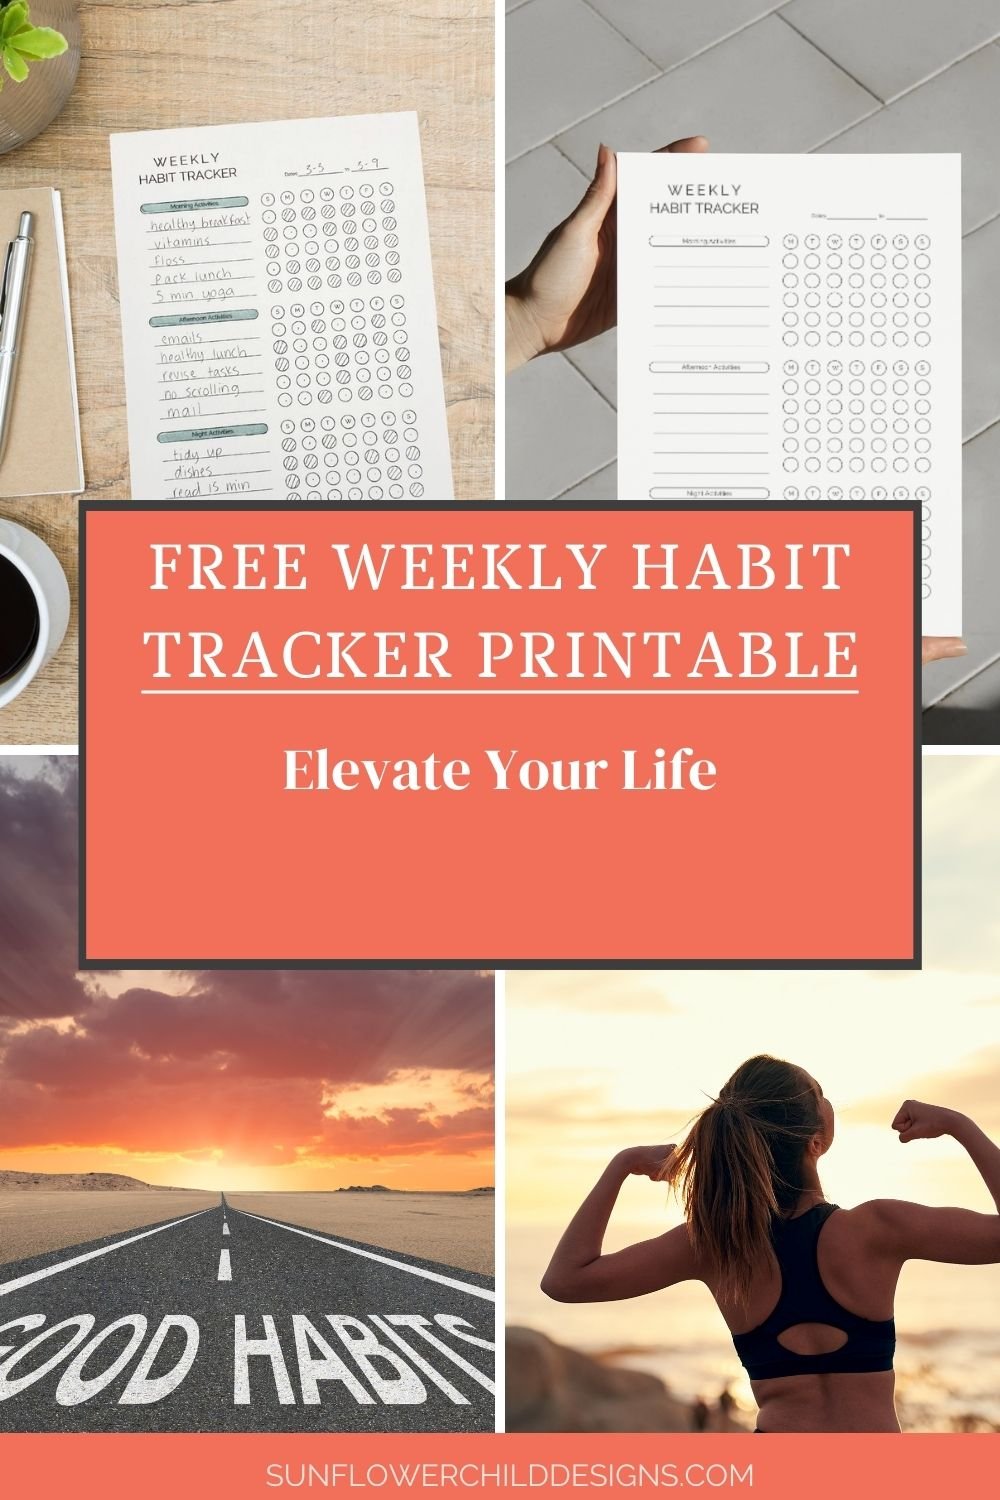 Transform Your Life with Our Free Printable Habit Tracker